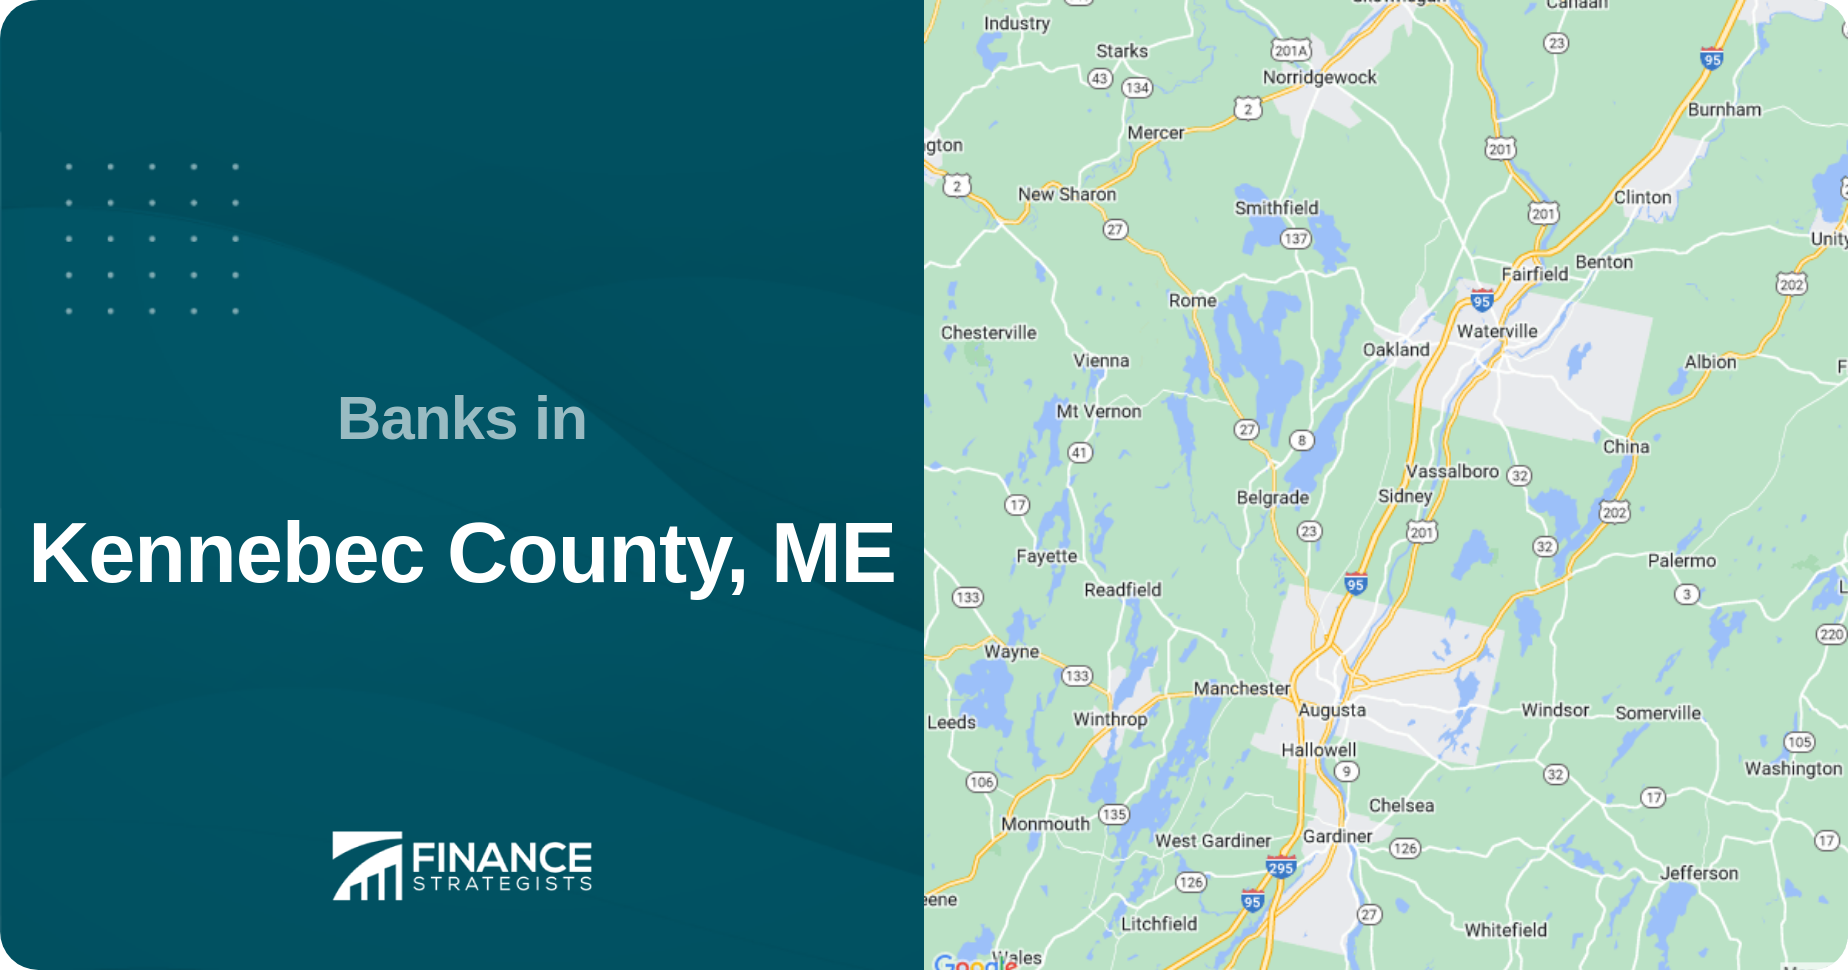 Banks in Kennebec County, ME